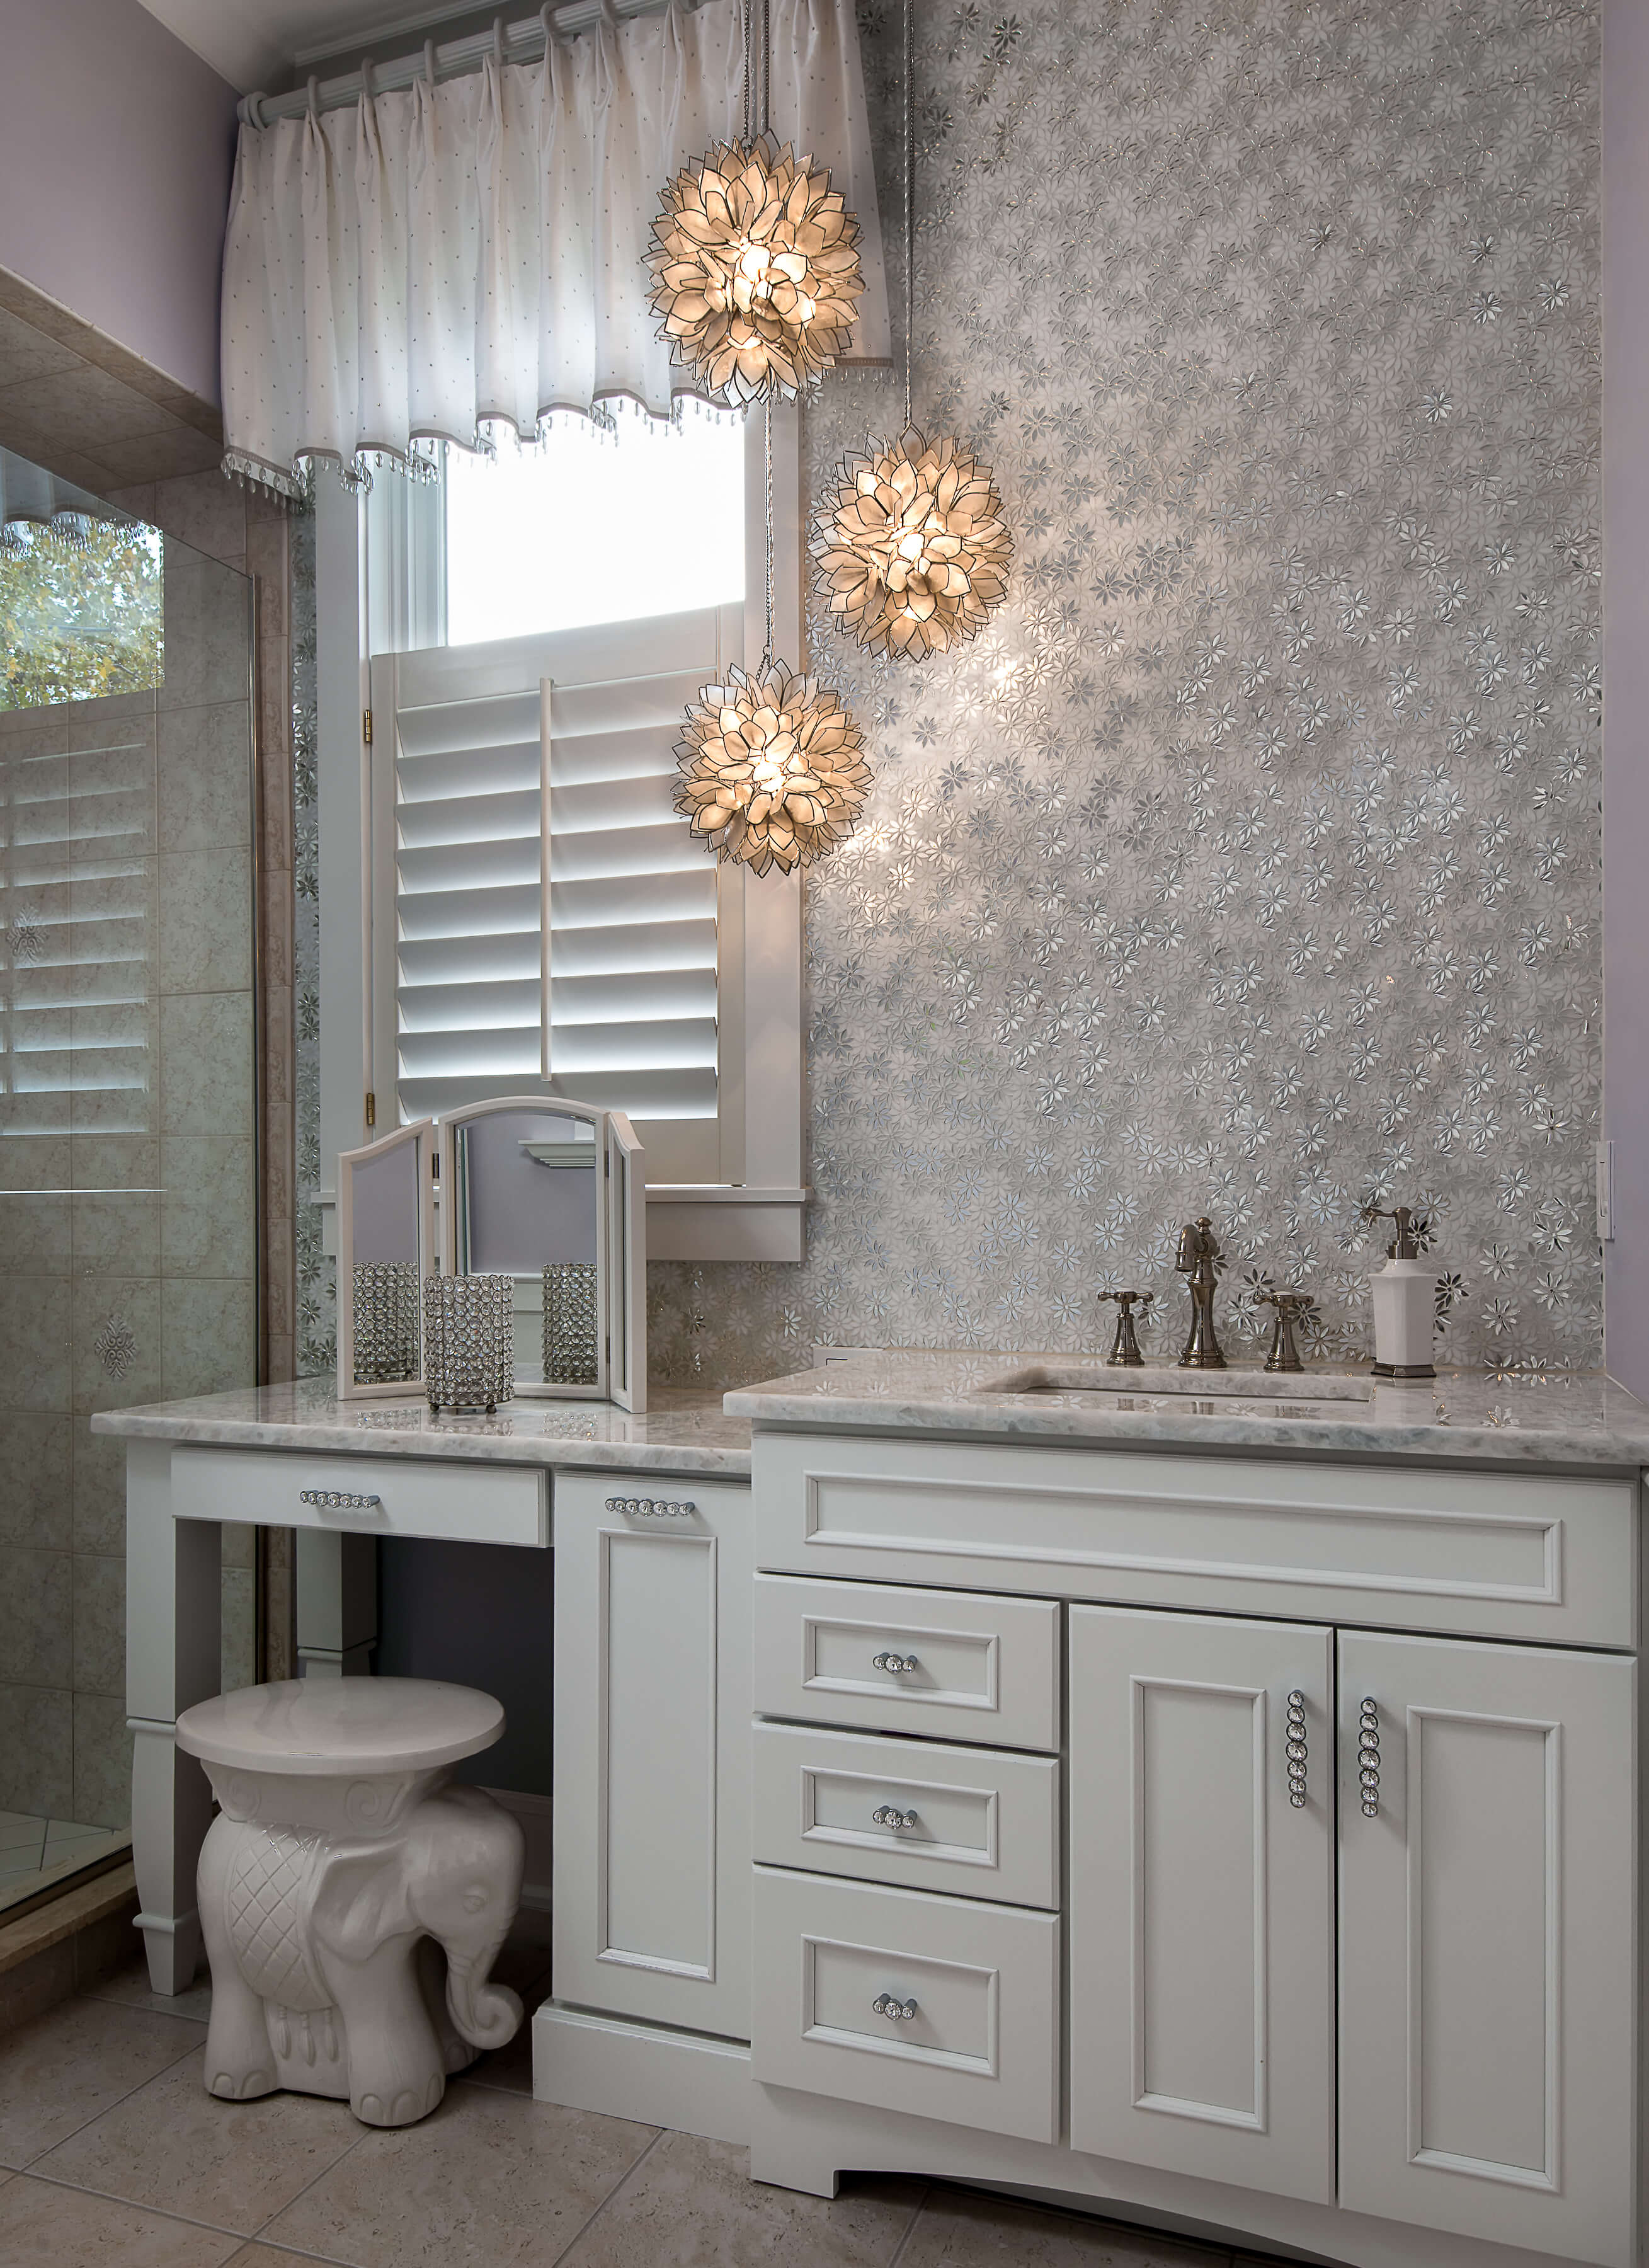 A glamourous powder room vanity with a makeup desk with white painted bathroom cabinets that have full overlay flat panel doors. A metallic wallpaper and dazzling pendent lights had a spark of glam to the remodeled room.